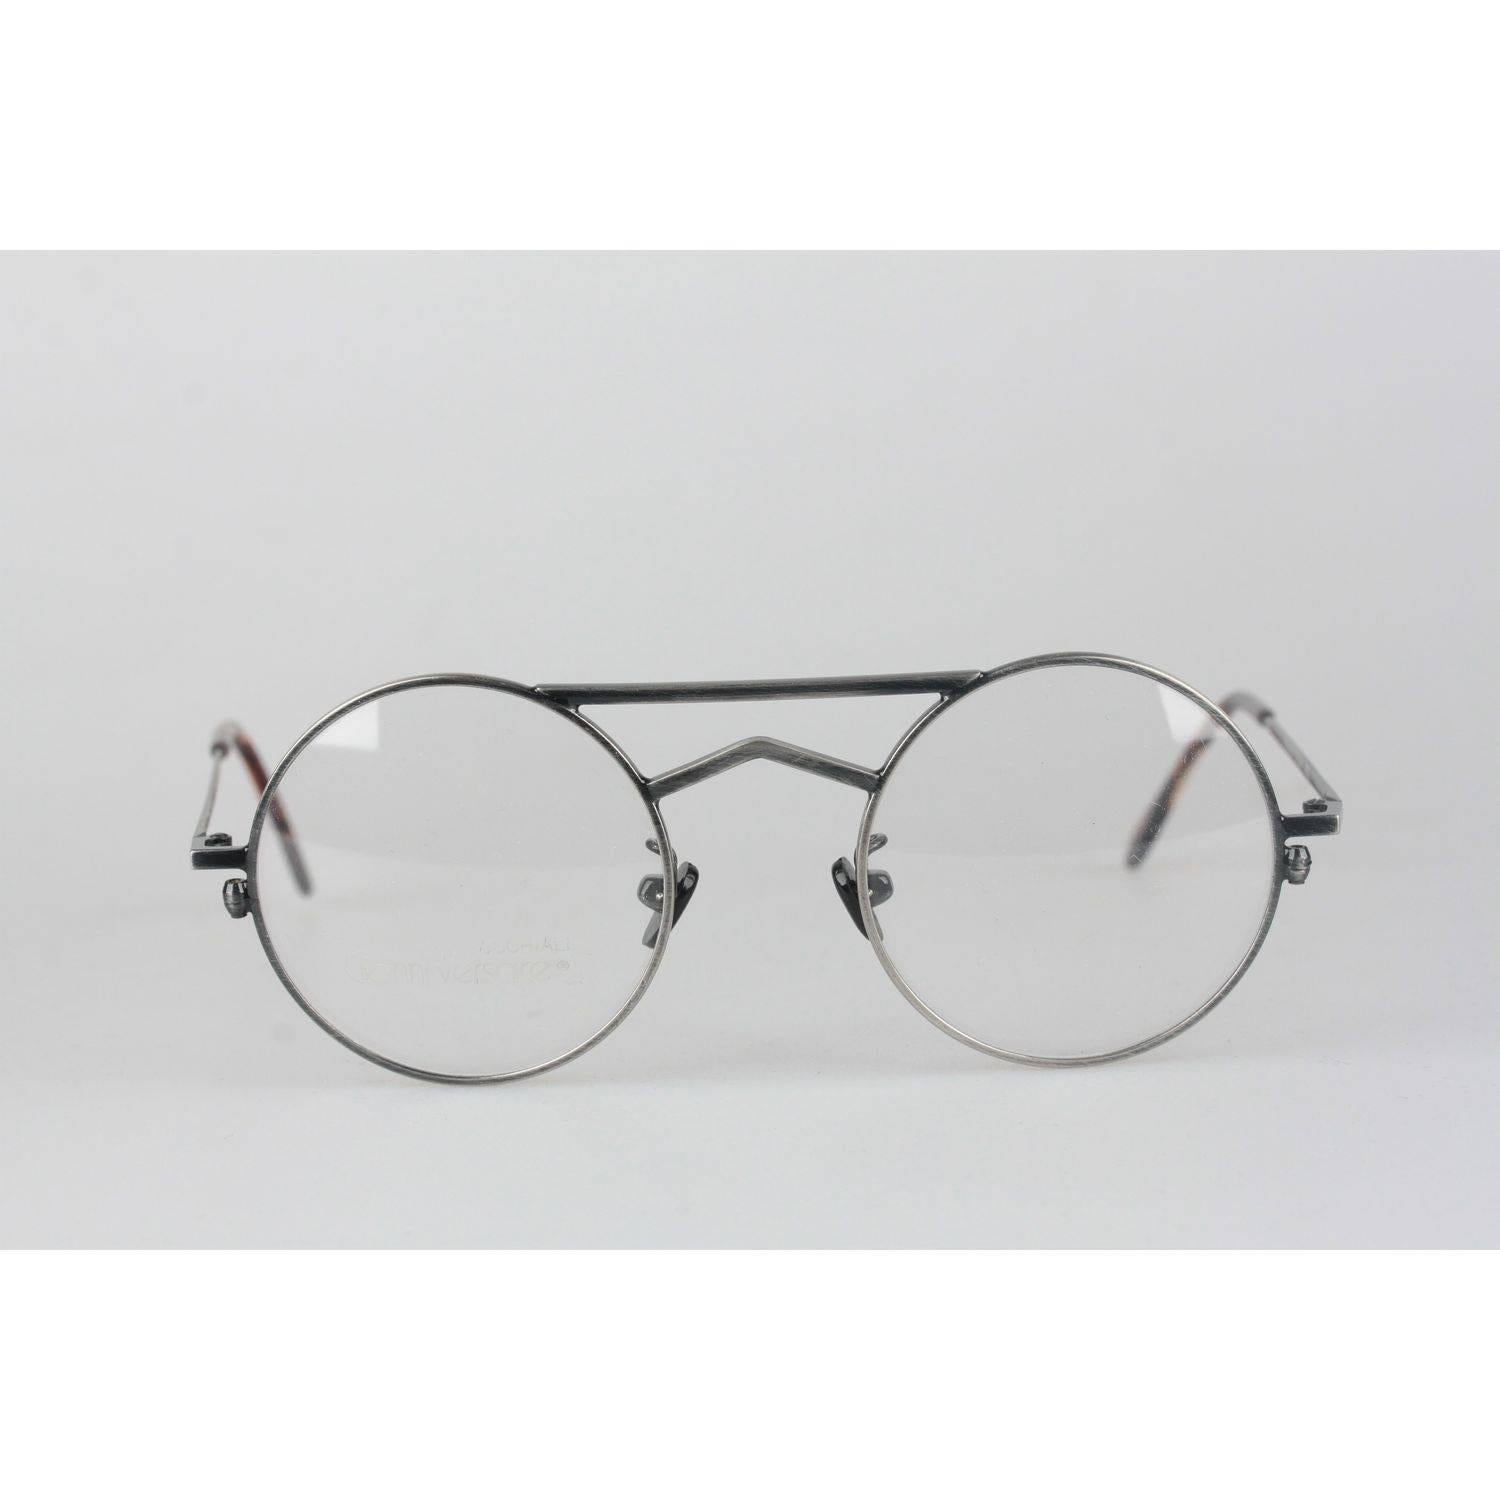 - Supercool round frames by Gianni Versace in the 1980s
Mod. 540 - Col. 943 - 44-22
- Made in italy
-  Gunmetal frame 
- Clear DEMO lenses 
- Cool double bridge structure and tortoise temple tips.
- Minimalist and smart shades

Measurements: 
-